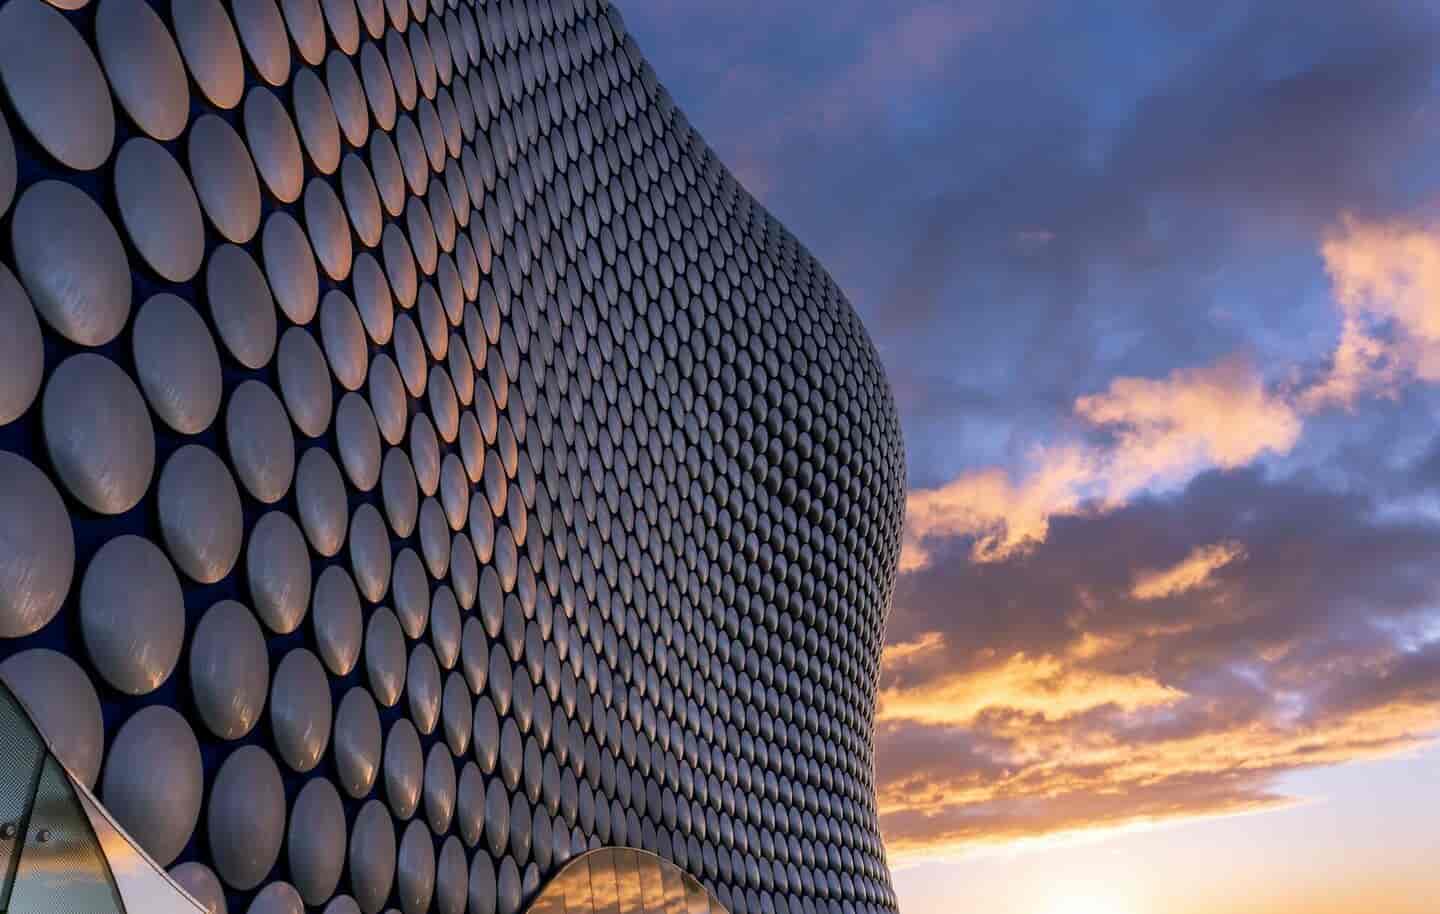 Student Accommodation in Birmingham - Bullring Shopping Centre on a cloudy evening